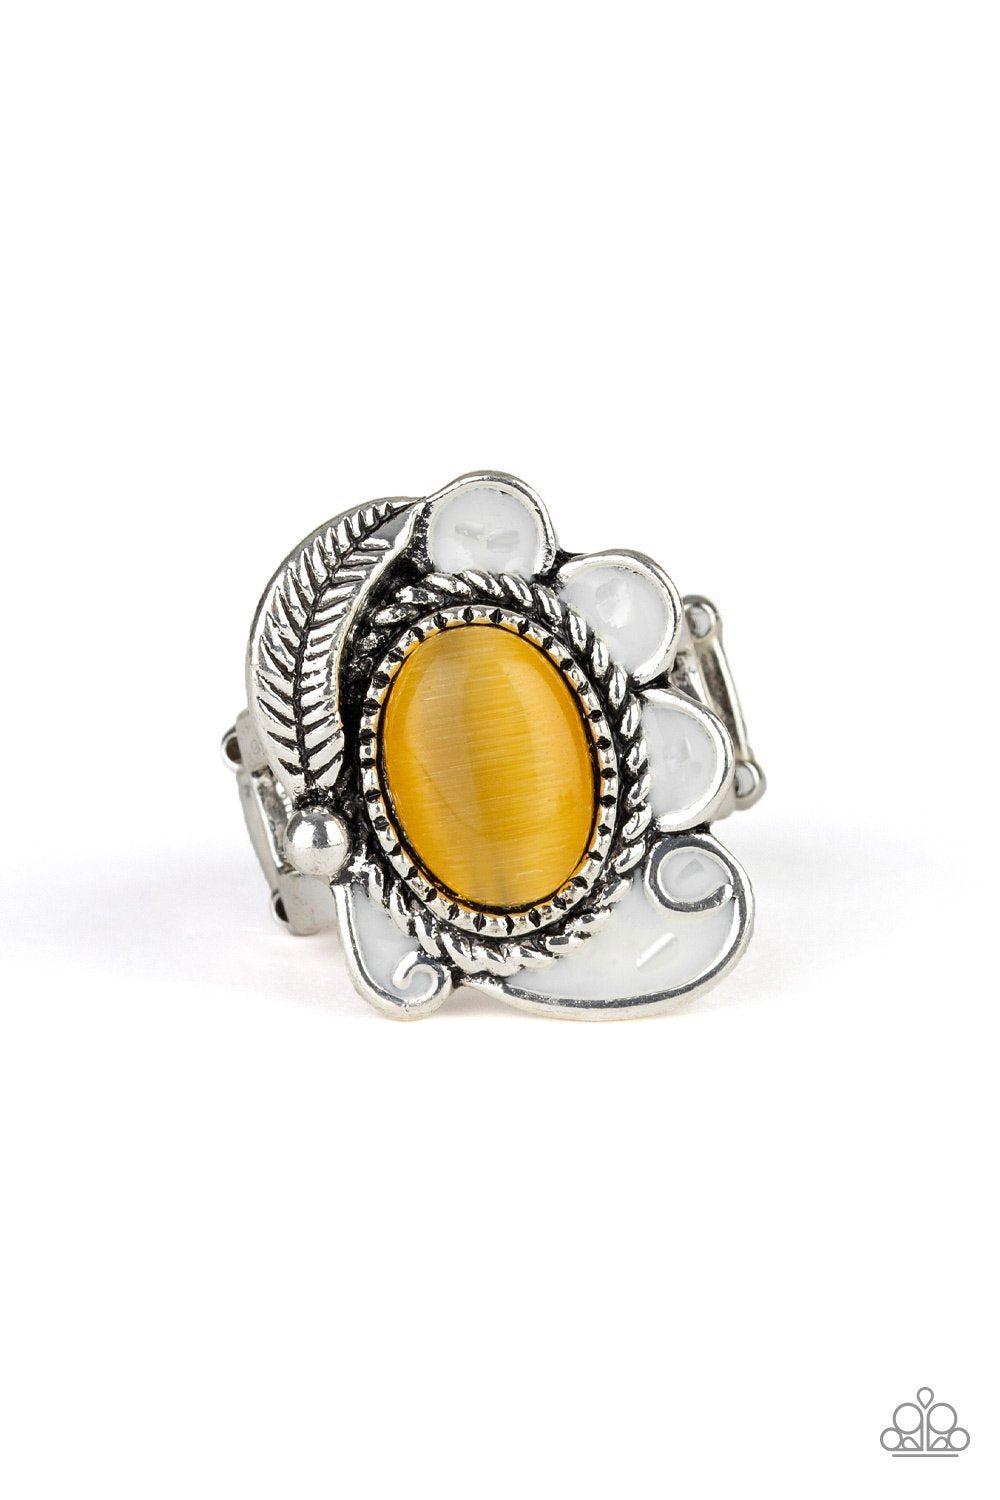 Fairytale Magic Yellow Moonstone Ring - Paparazzi Accessories-CarasShop.com - $5 Jewelry by Cara Jewels